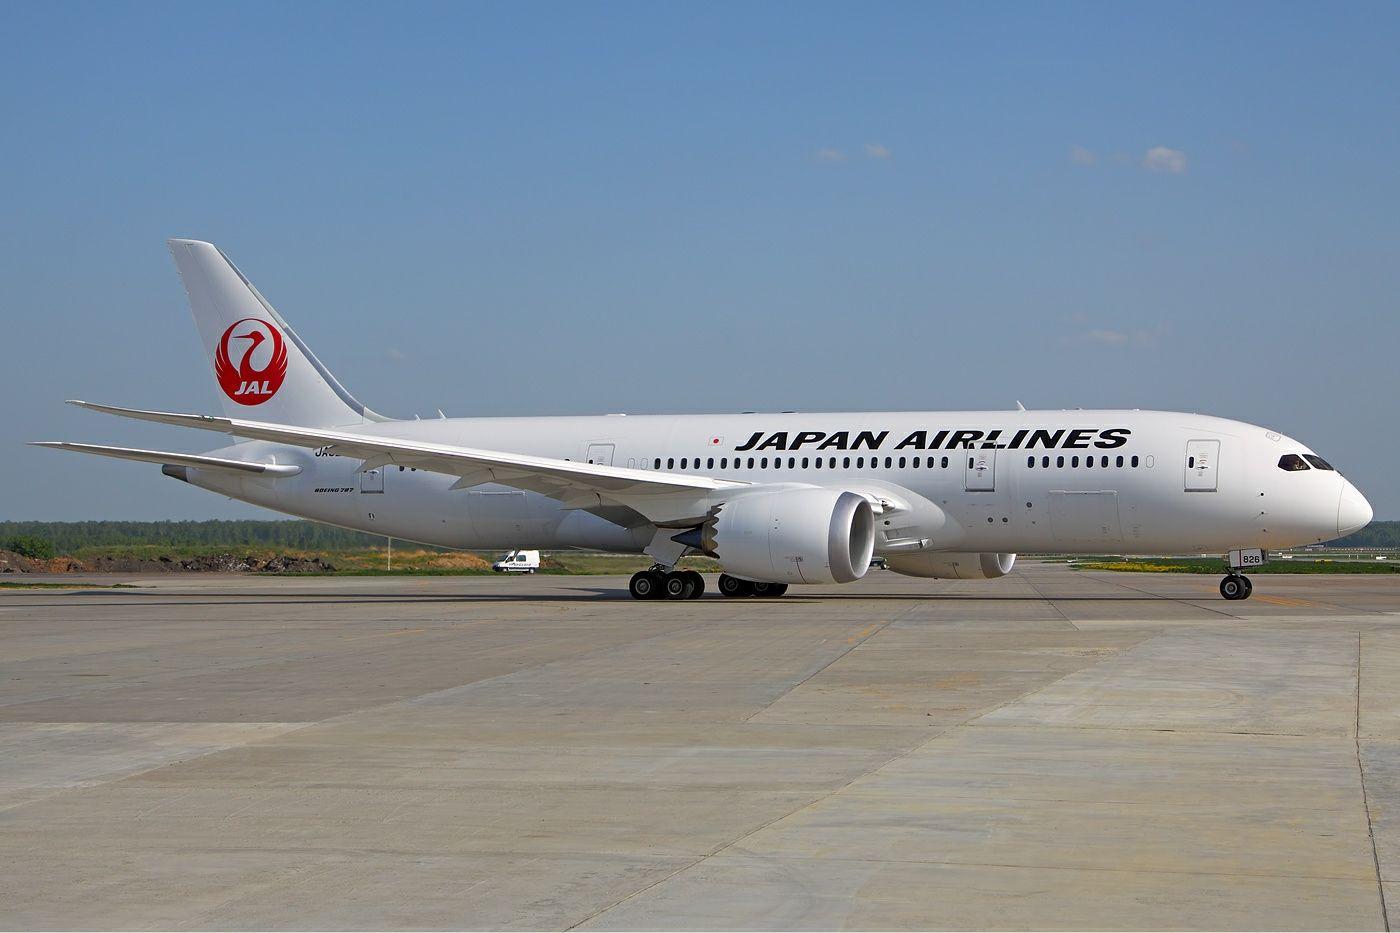 Old Jal Logo - JAL Group FY2013 & Monthly (March 2014) Traffic Data ·ETB Travel